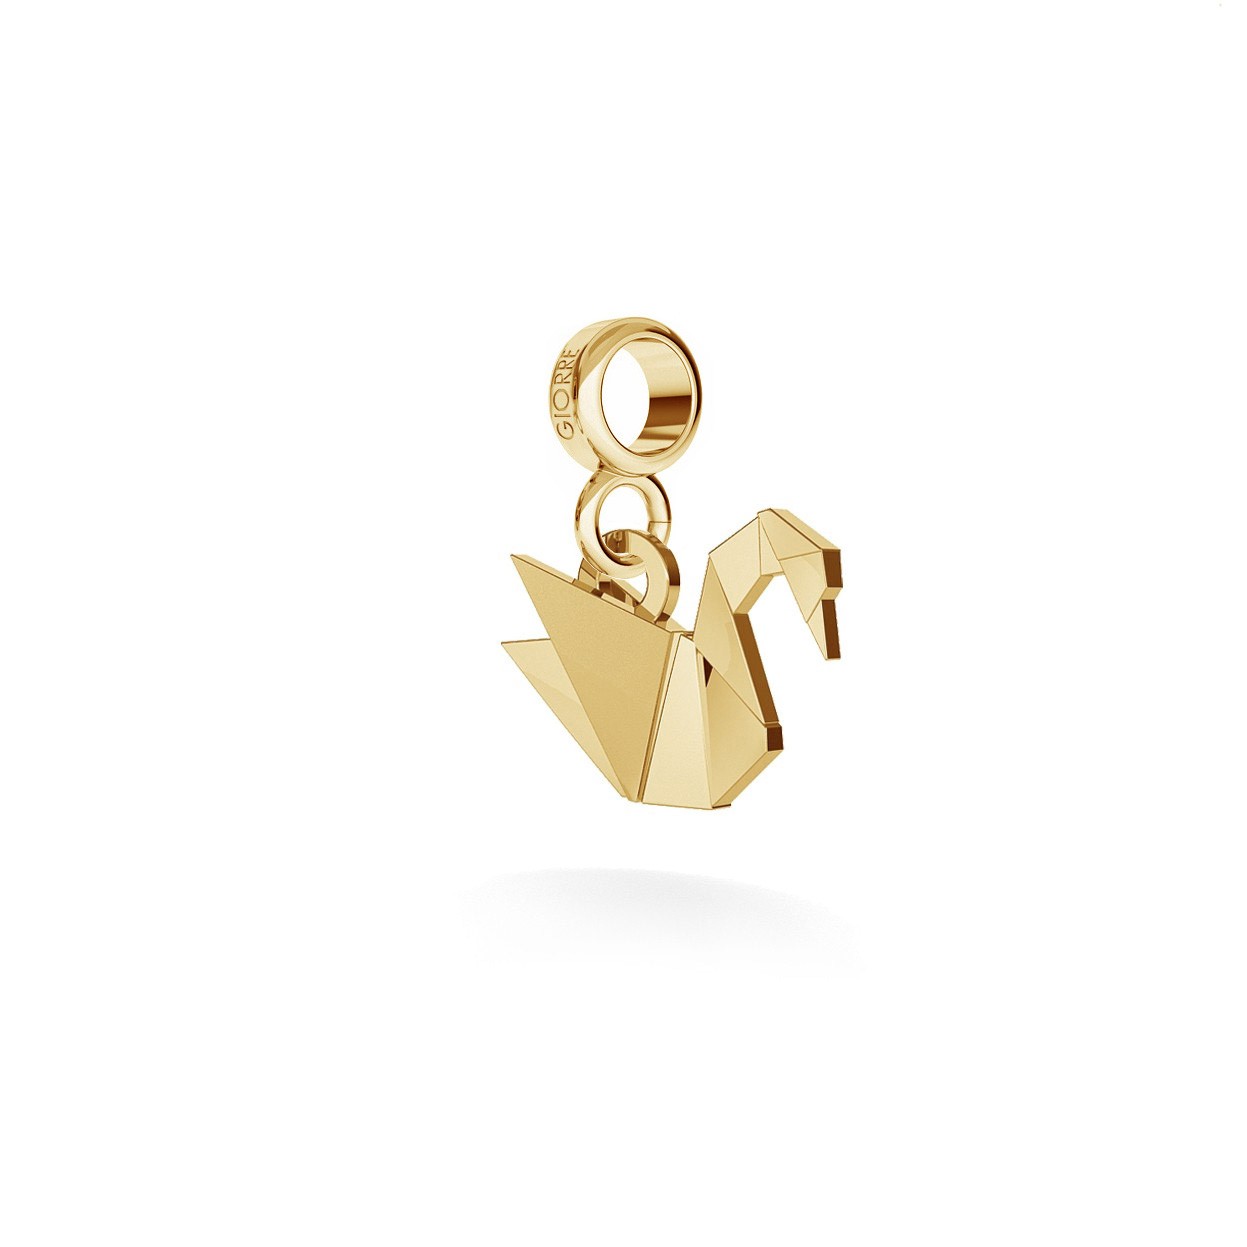 CHARM 38, ORIGAMI SWAN, SILVER 925, RHODIUM OR GOLD PLATED